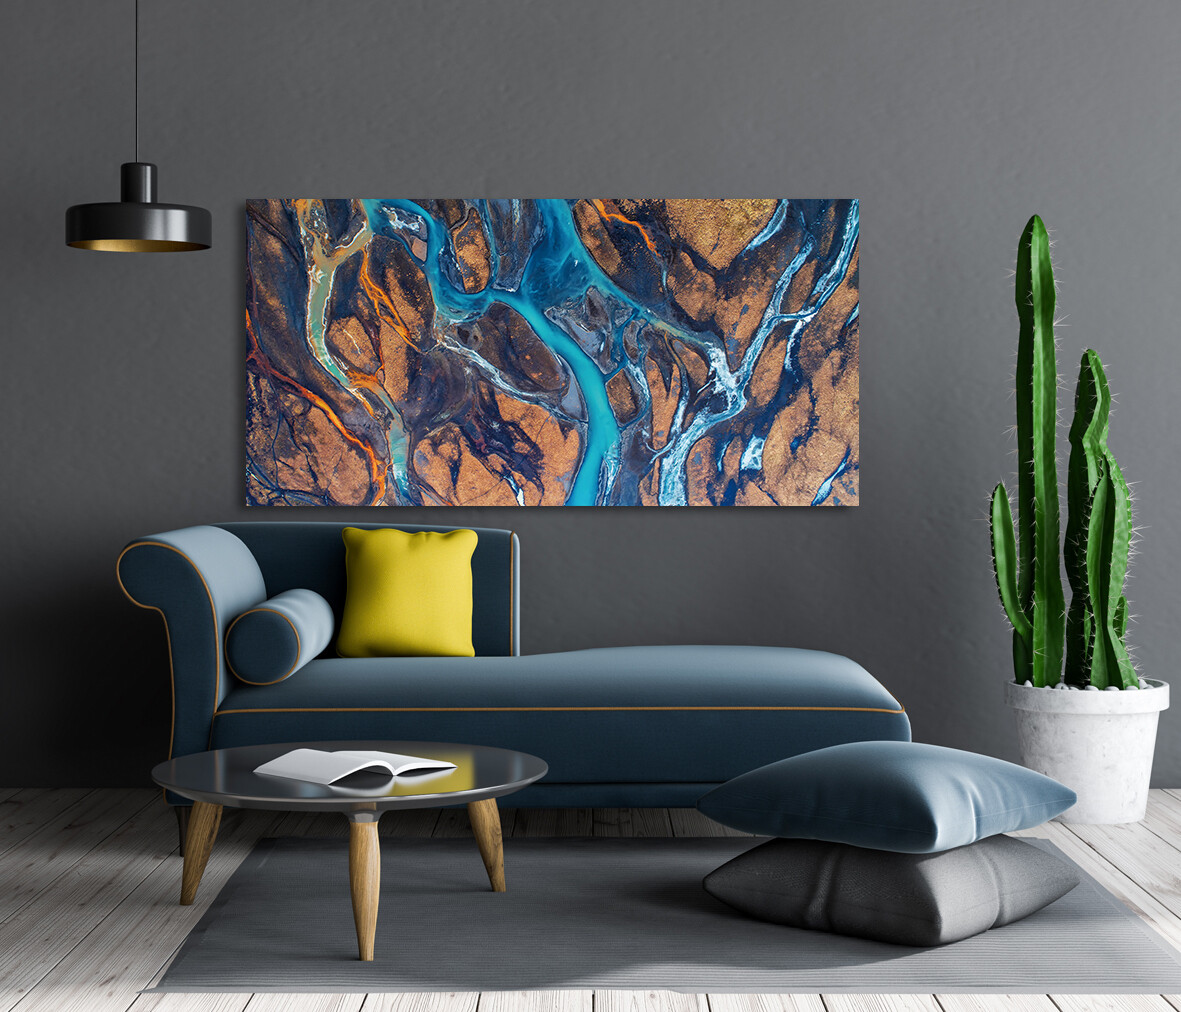 River In Iceland - Modern Luxury Wall art Printed on Acrylic Glass - Frameless and Ready to Hang